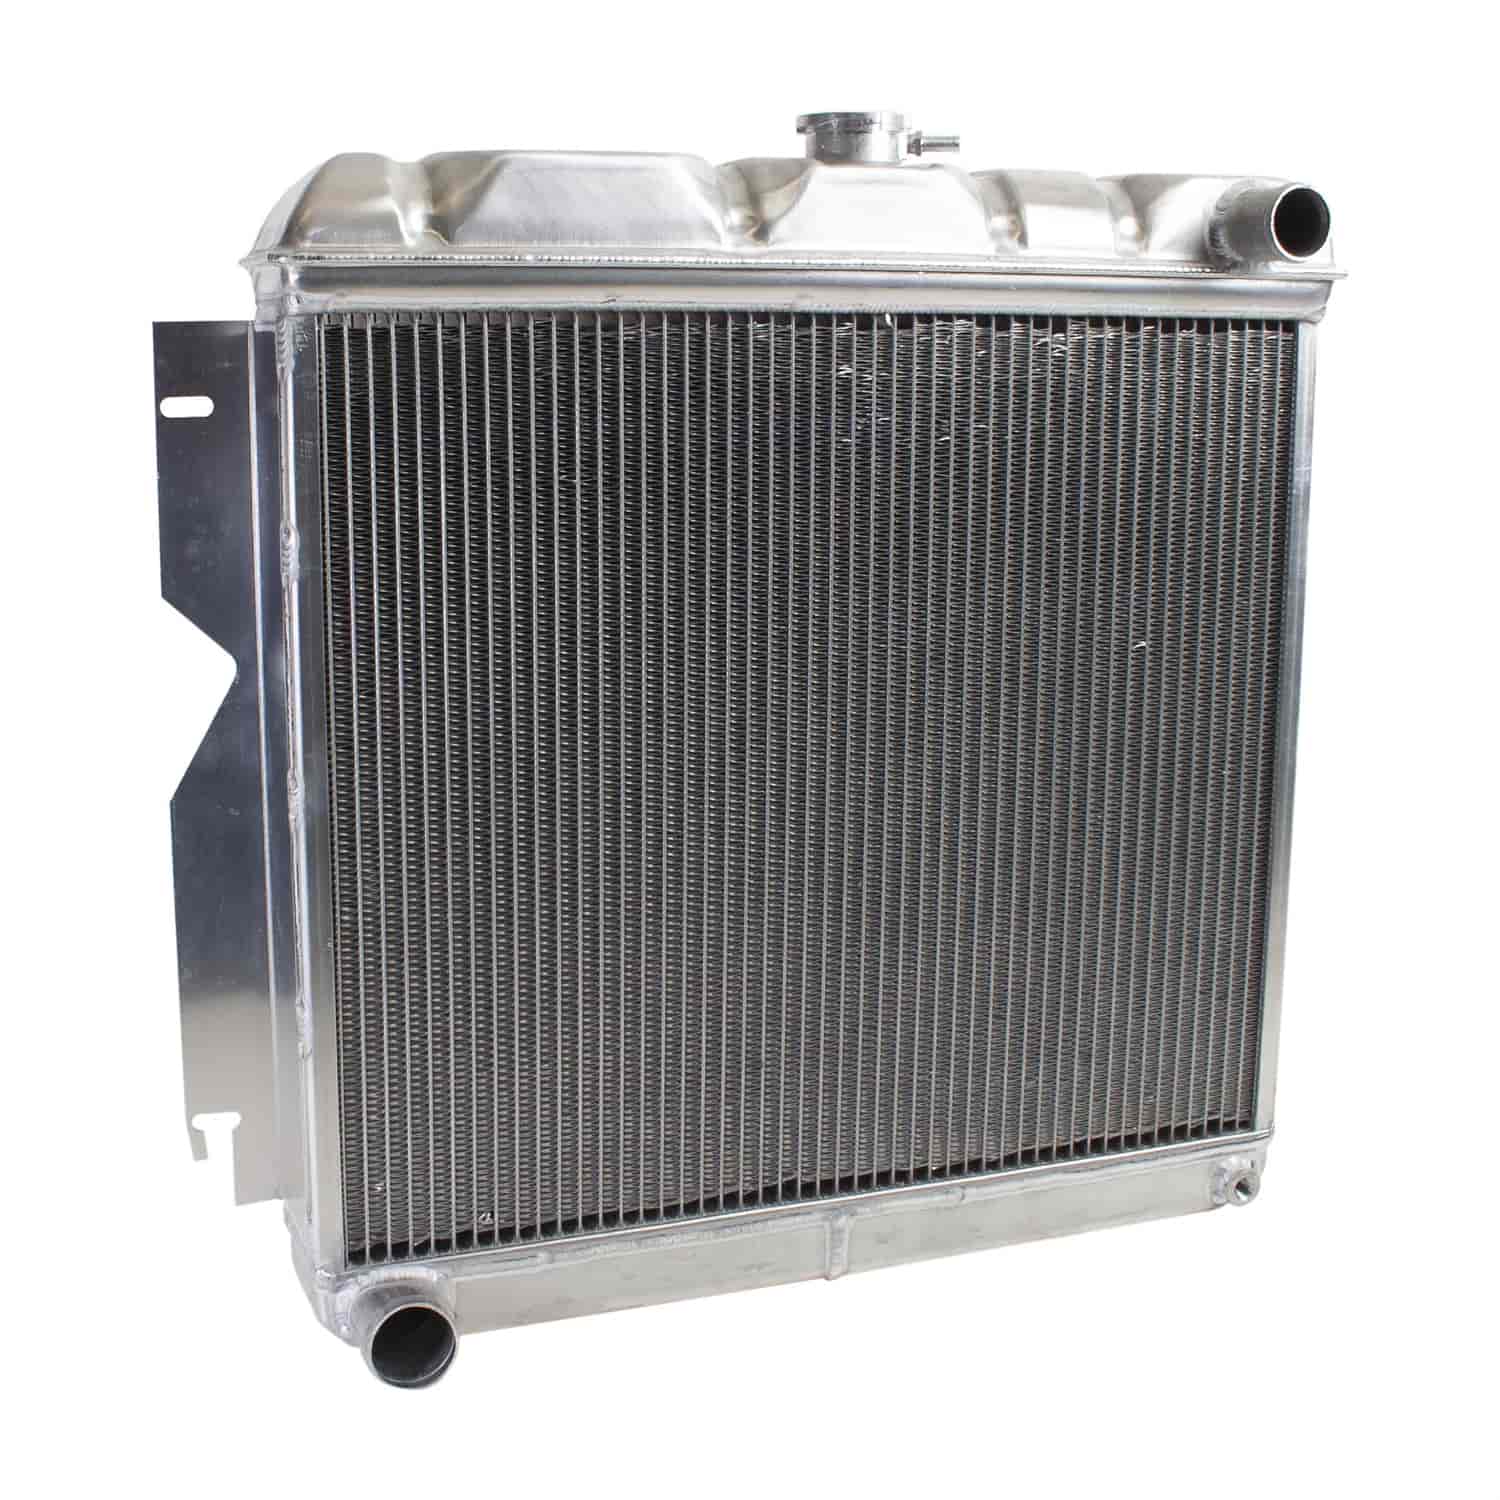 ExactFit Radiator for 1962-1965 Belvedere, Fury, and Sport Fury with Big Block